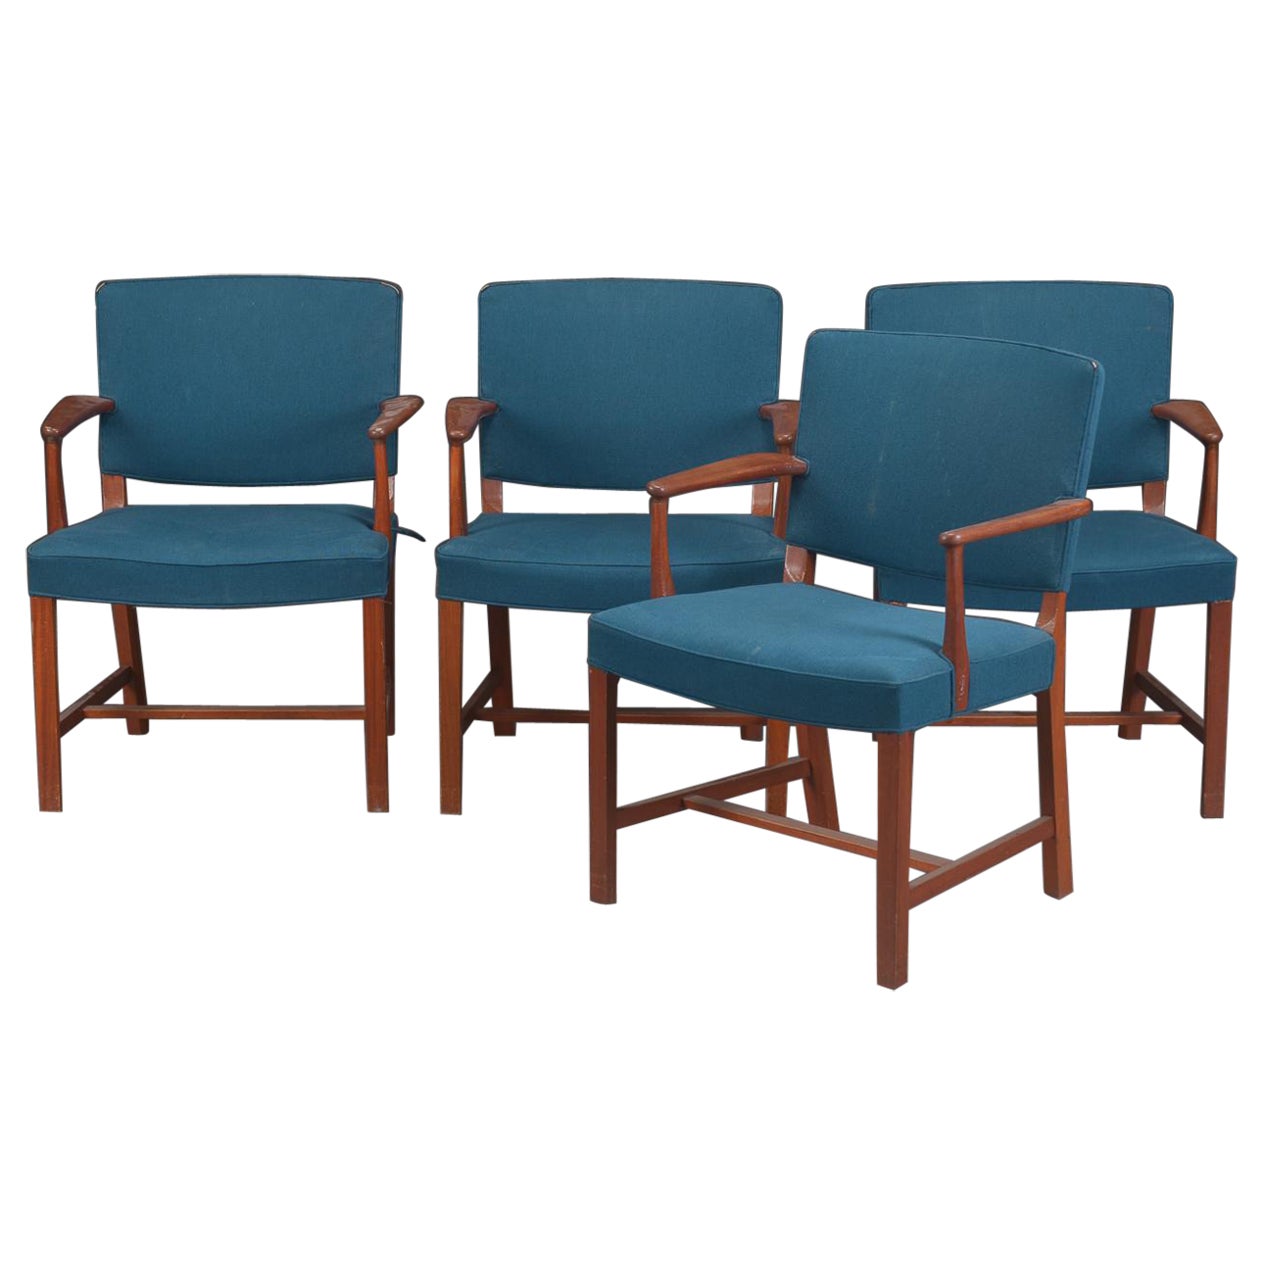 Set of Four Danish 1940s Mahogany Side or Desk Chairs with Open Armrests For Sale